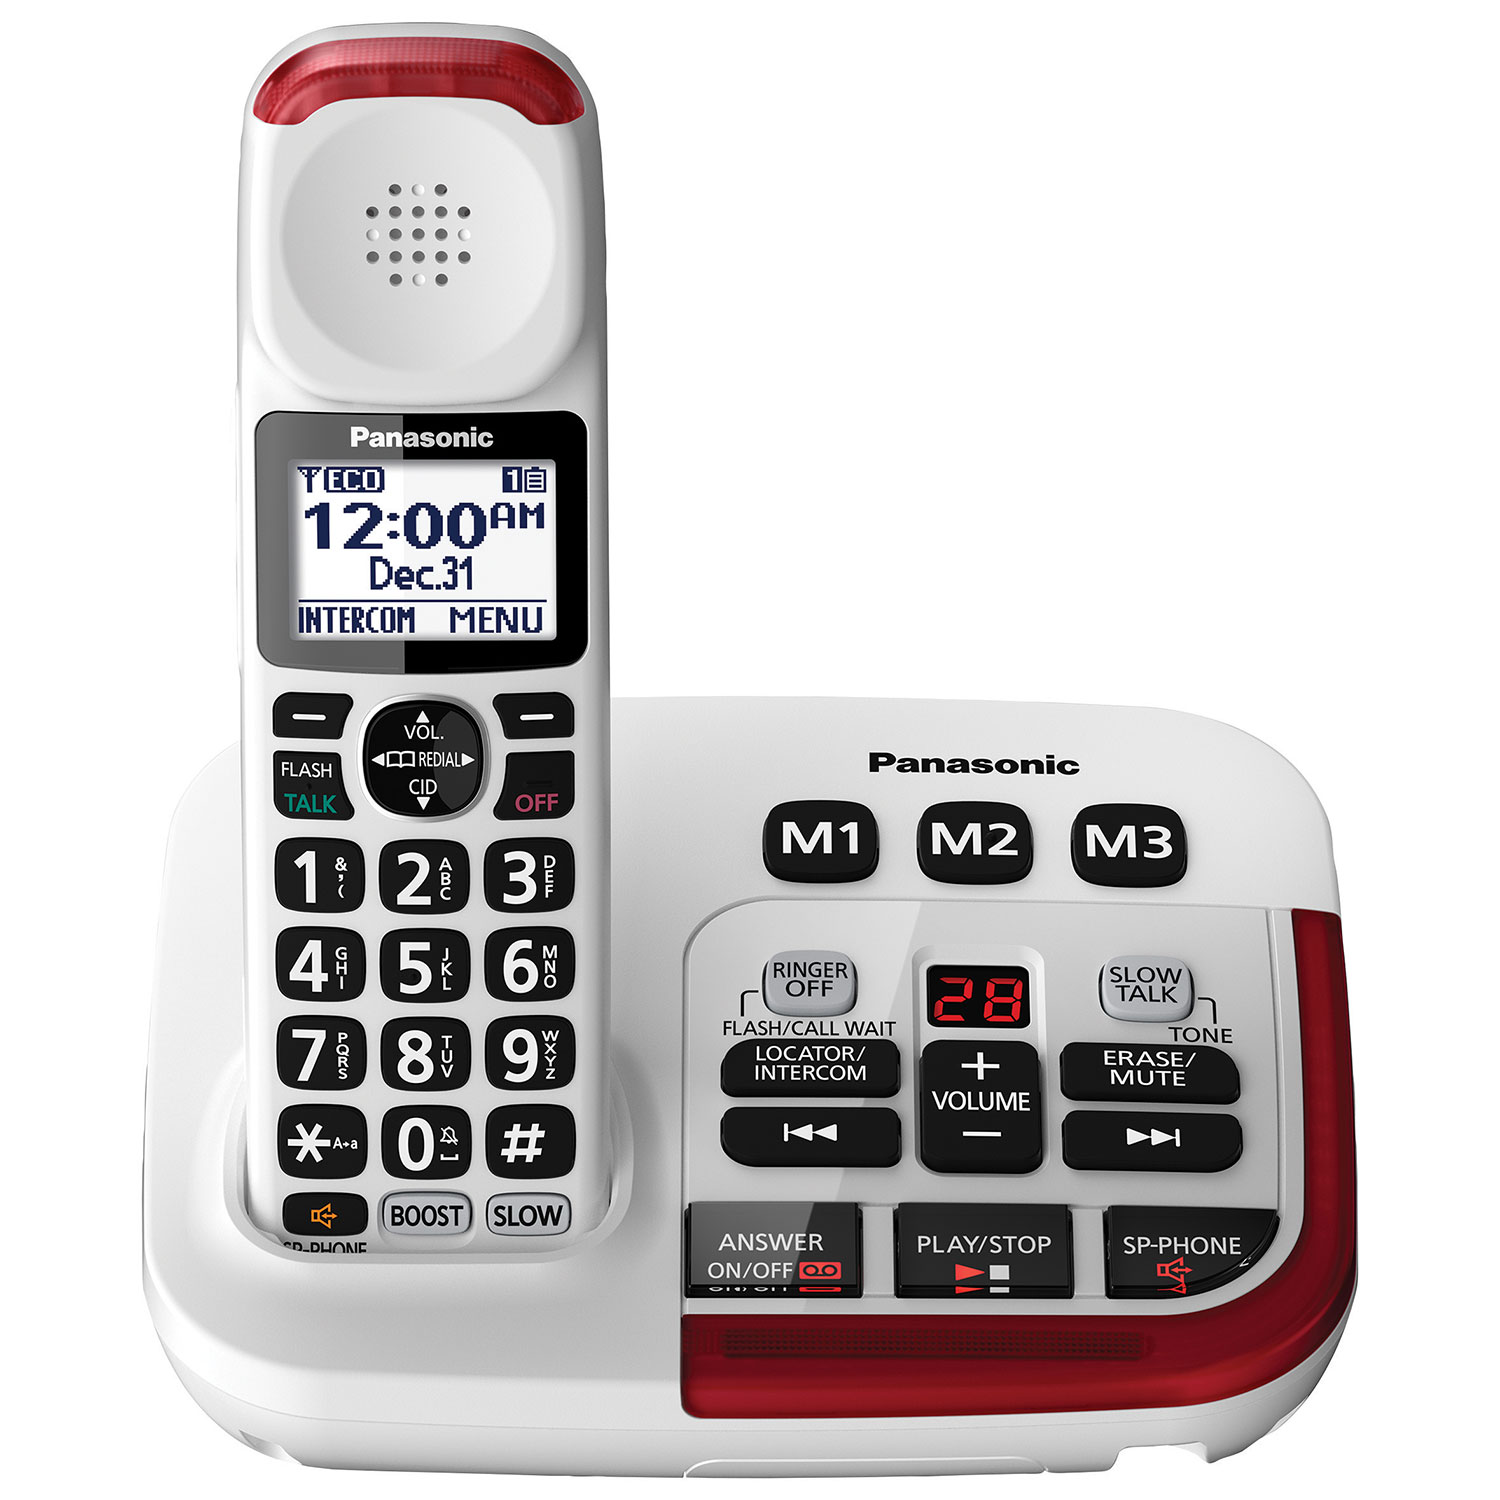 Panasonic 1.9GHz 1-Handset Amplified Cordless Phone with Answering Machine (KXTGM470W) - White